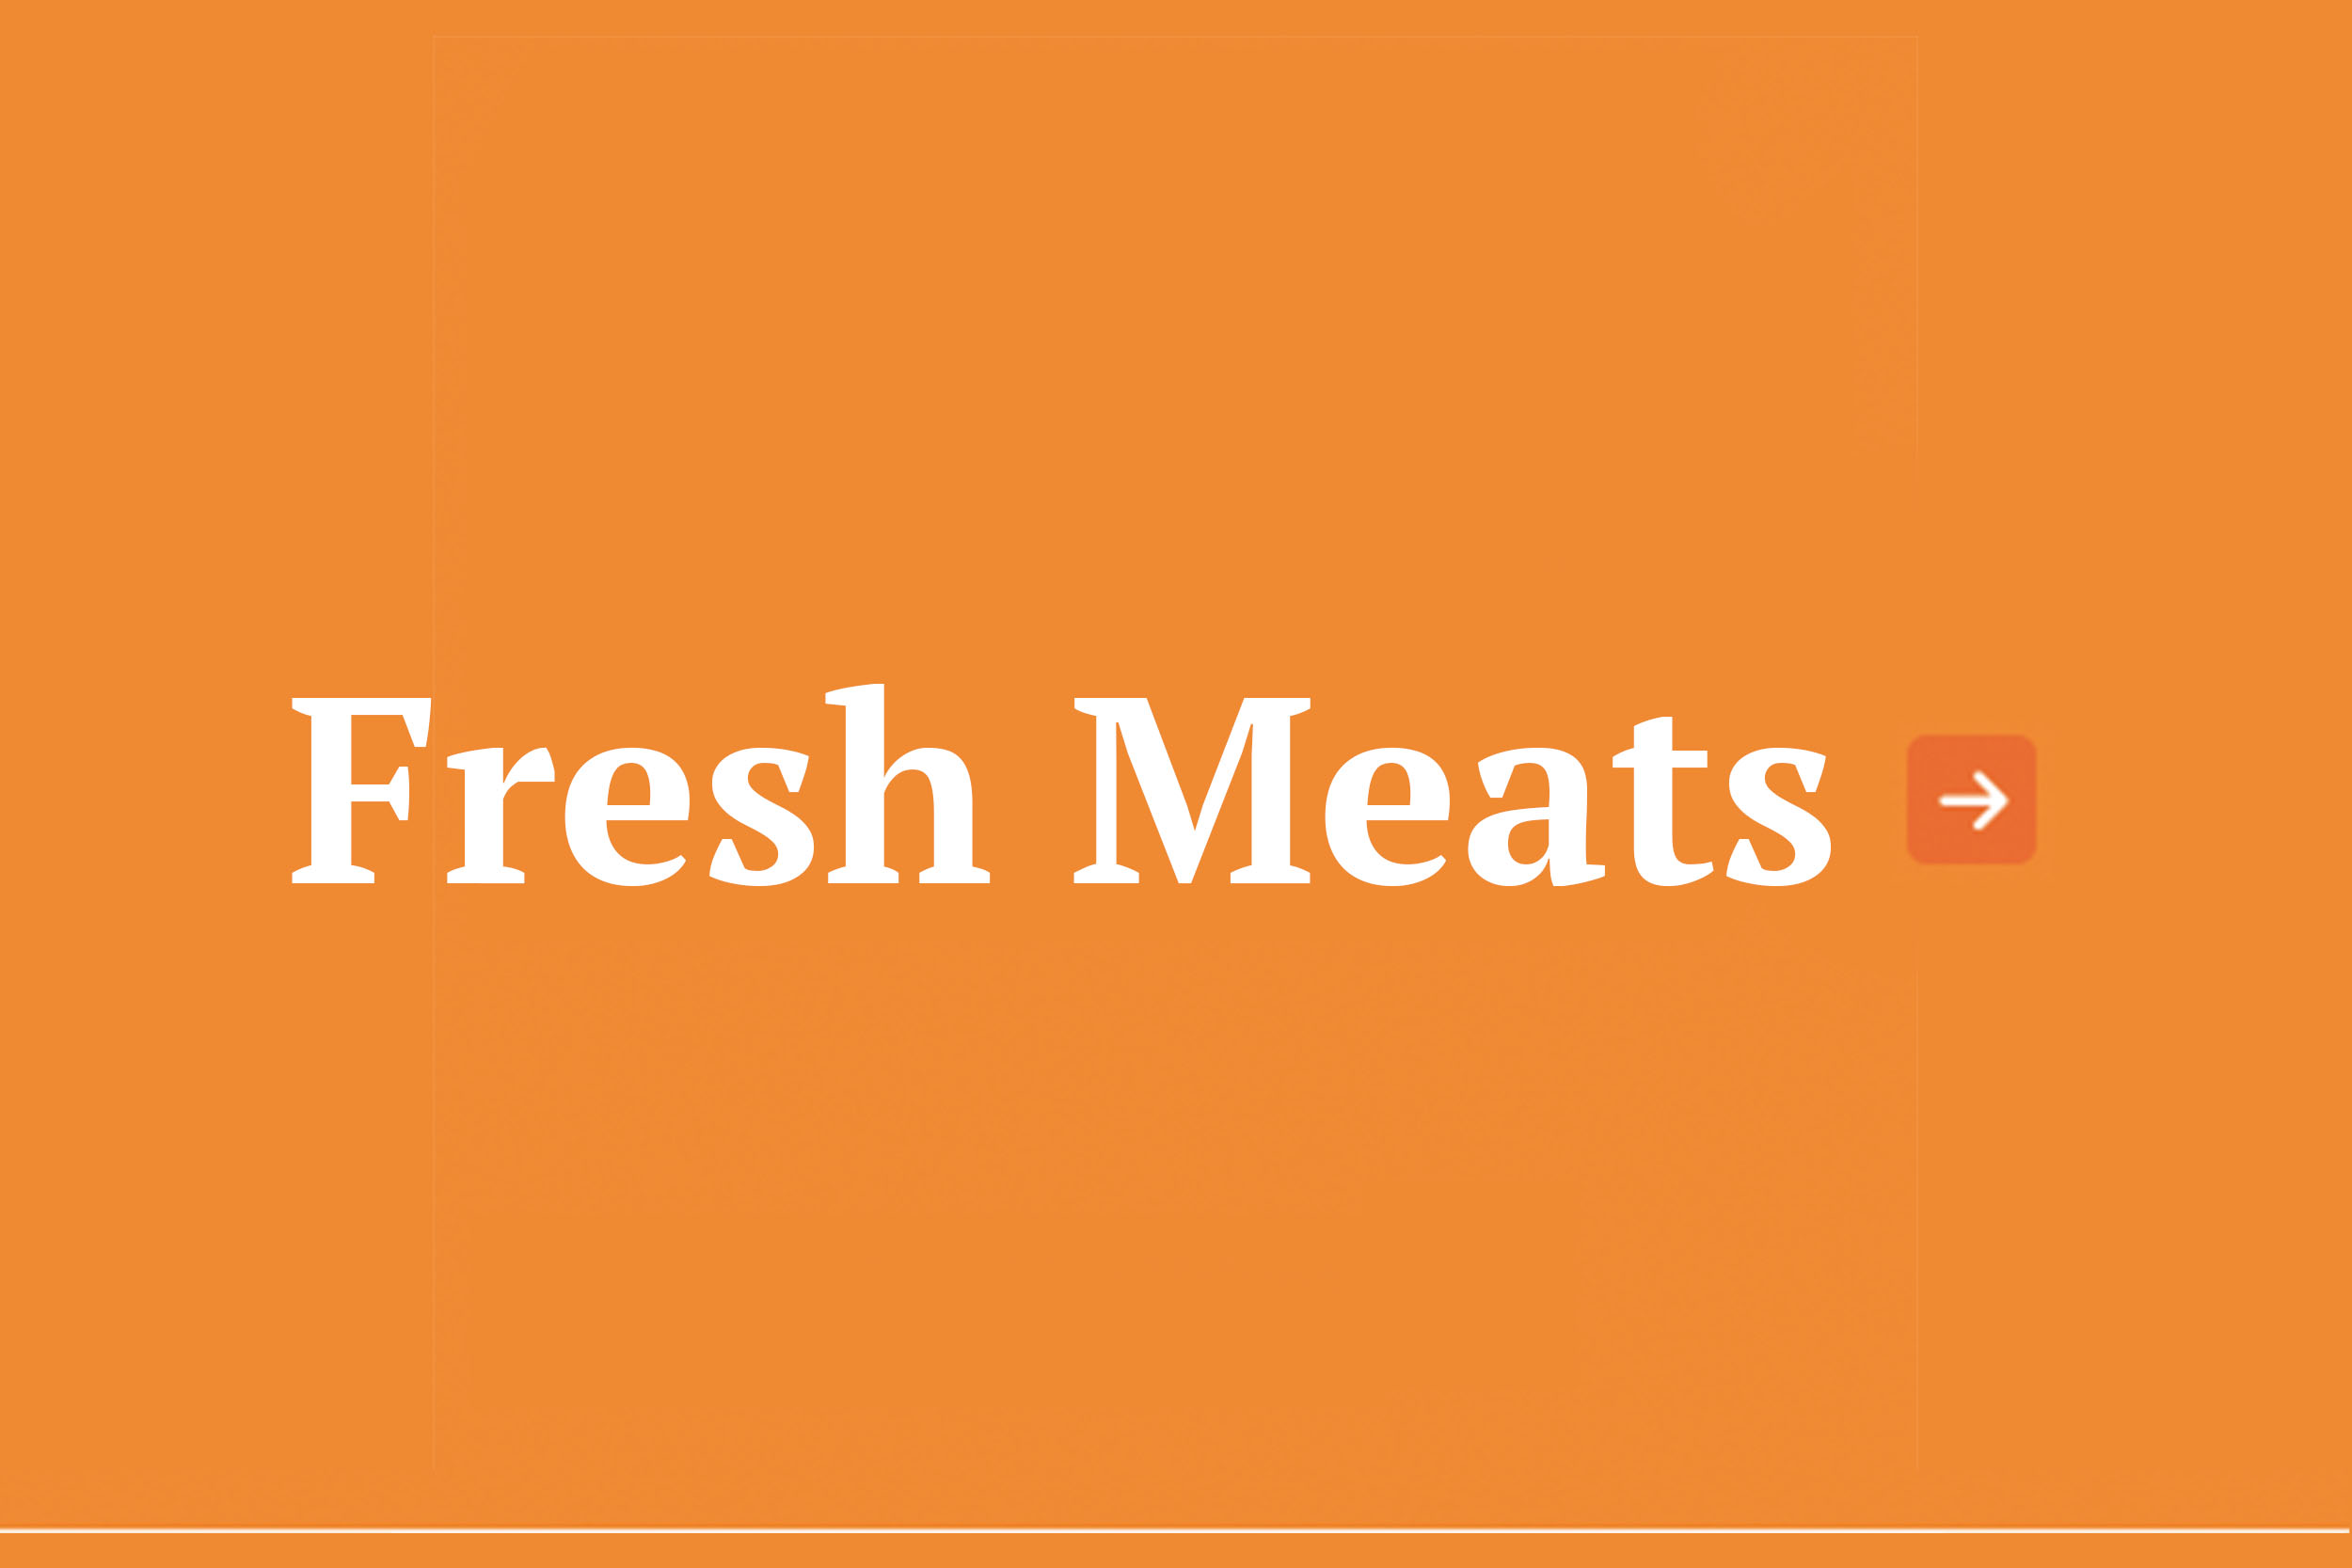 dearborn-wholesale-grocers-chicago-where-to-get-cheap-groceries-60624-fresh-meats.jpg